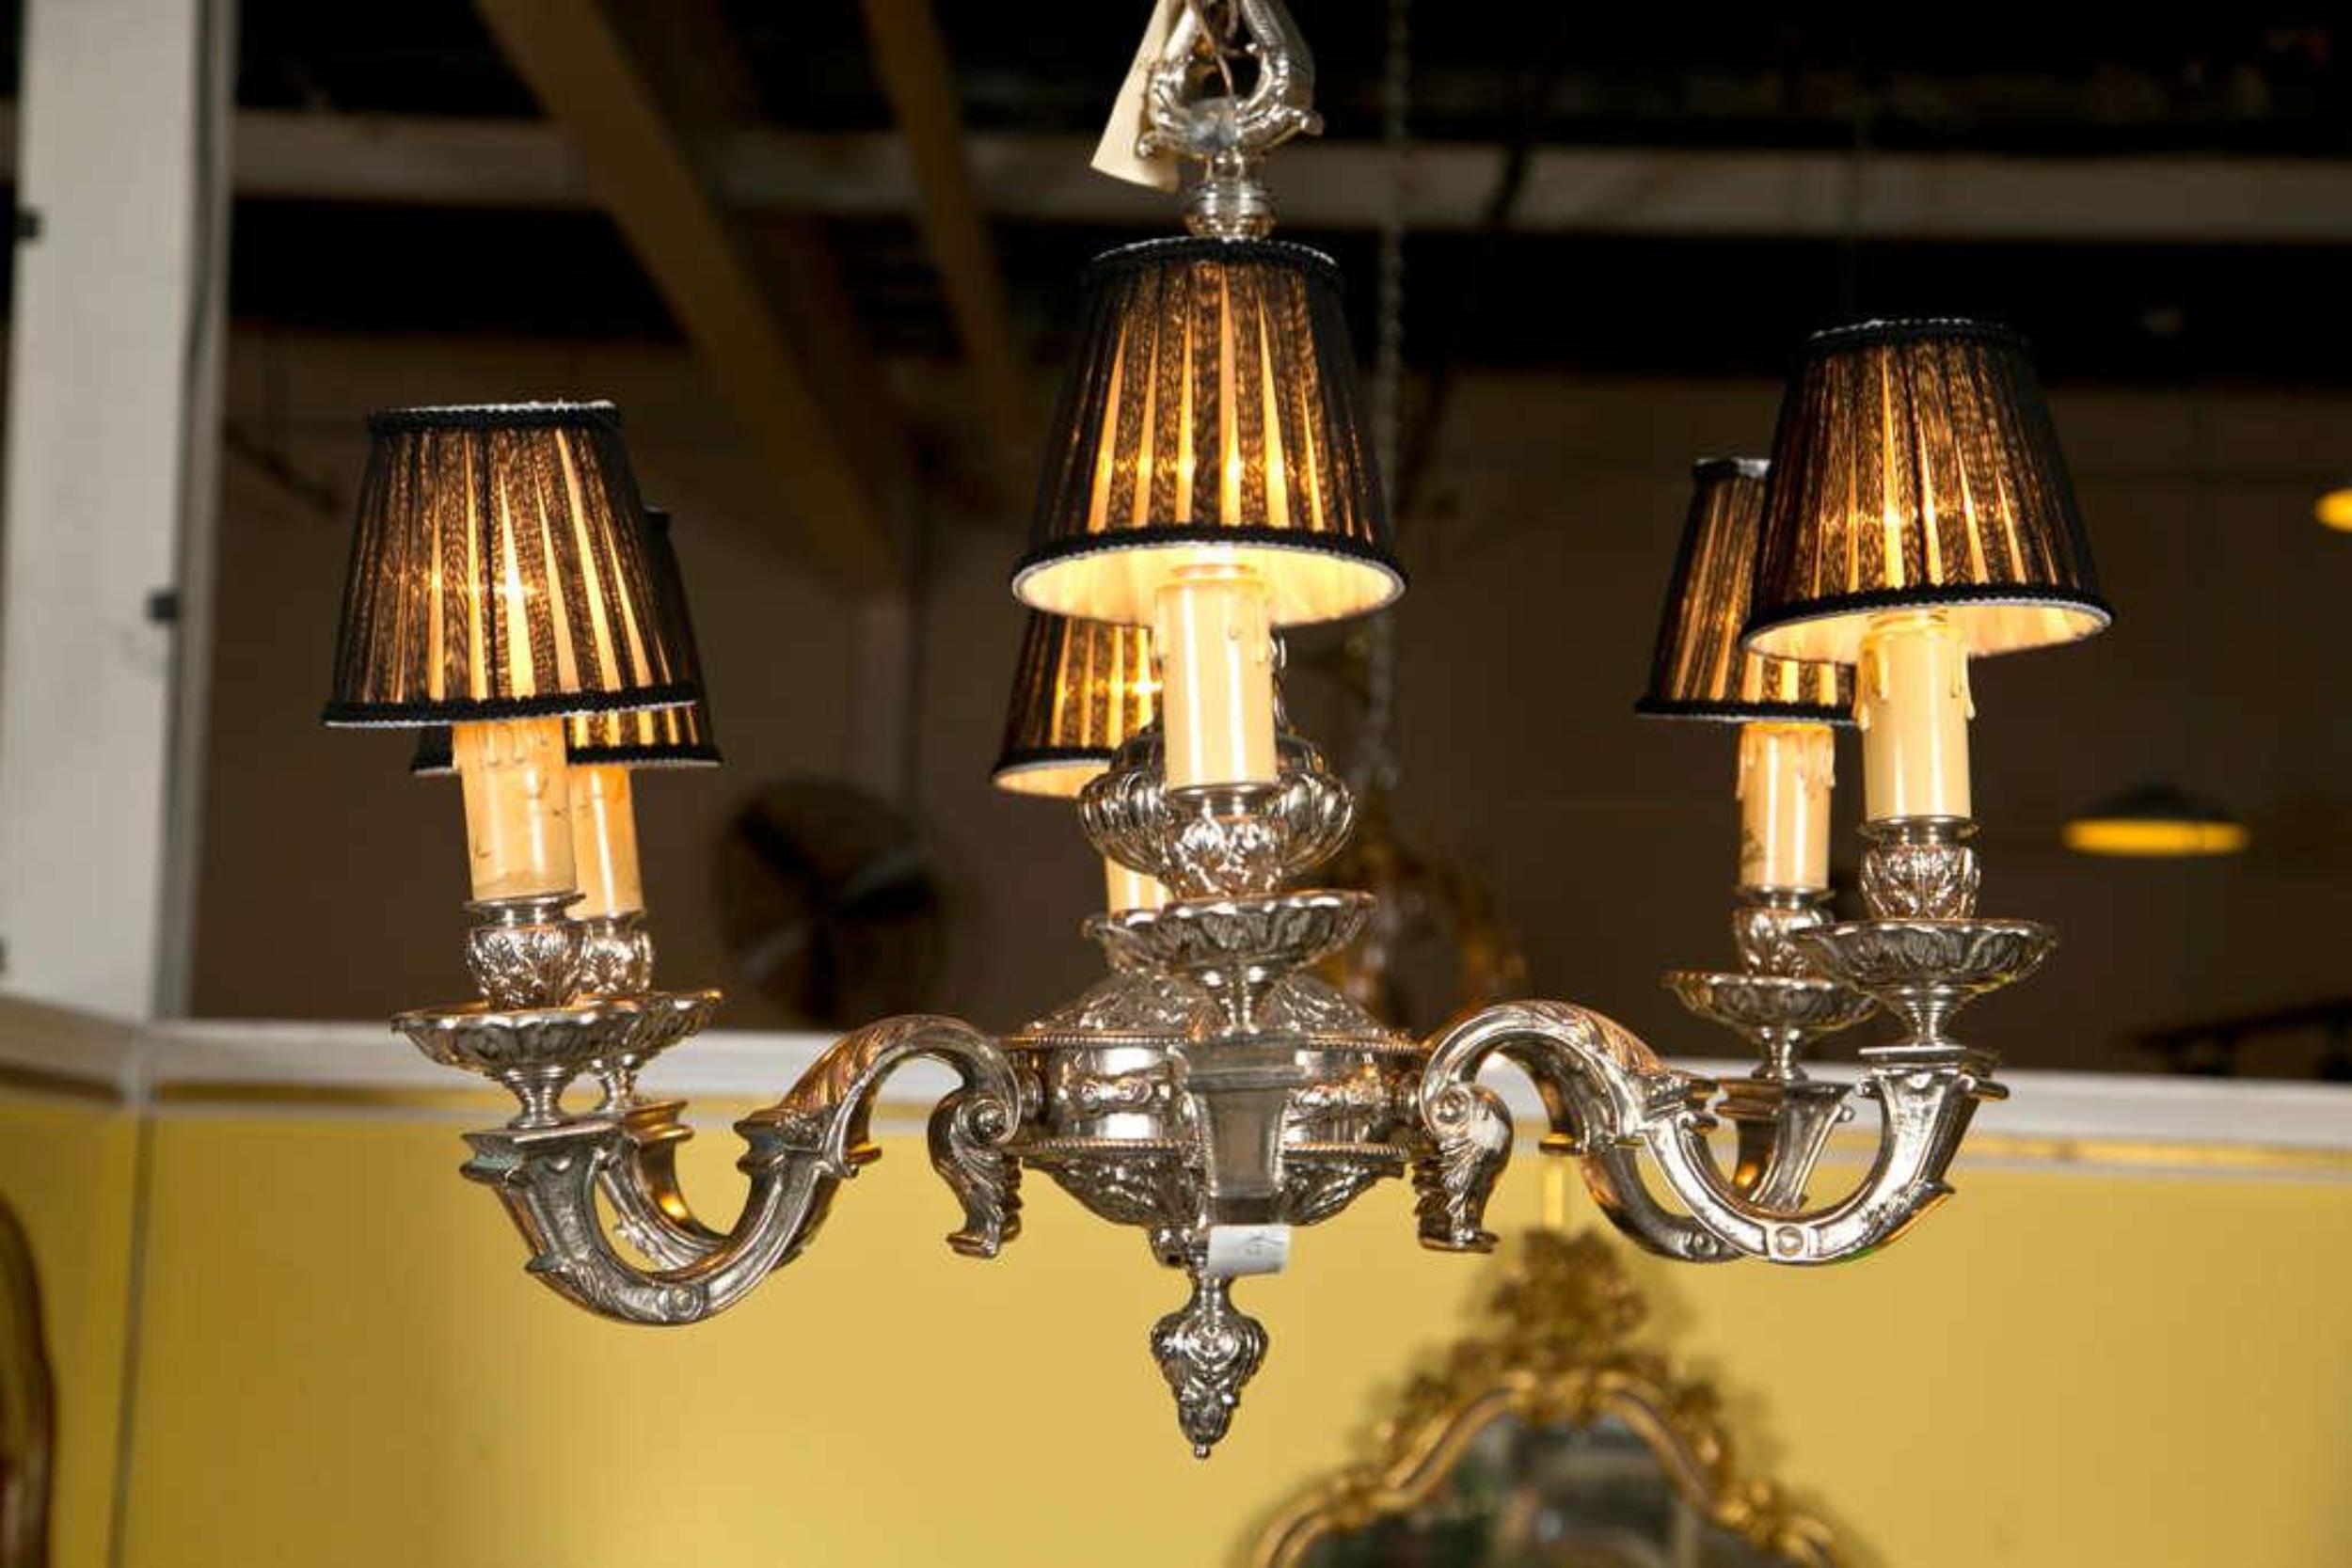 A finely cast six light silvered bronze chandelier. The center column leading to six arms all newly wired. The
finely Rococo frame all over decorated with scrolls and leaf design. When looking up front the table the bottom is wonderful crafted and